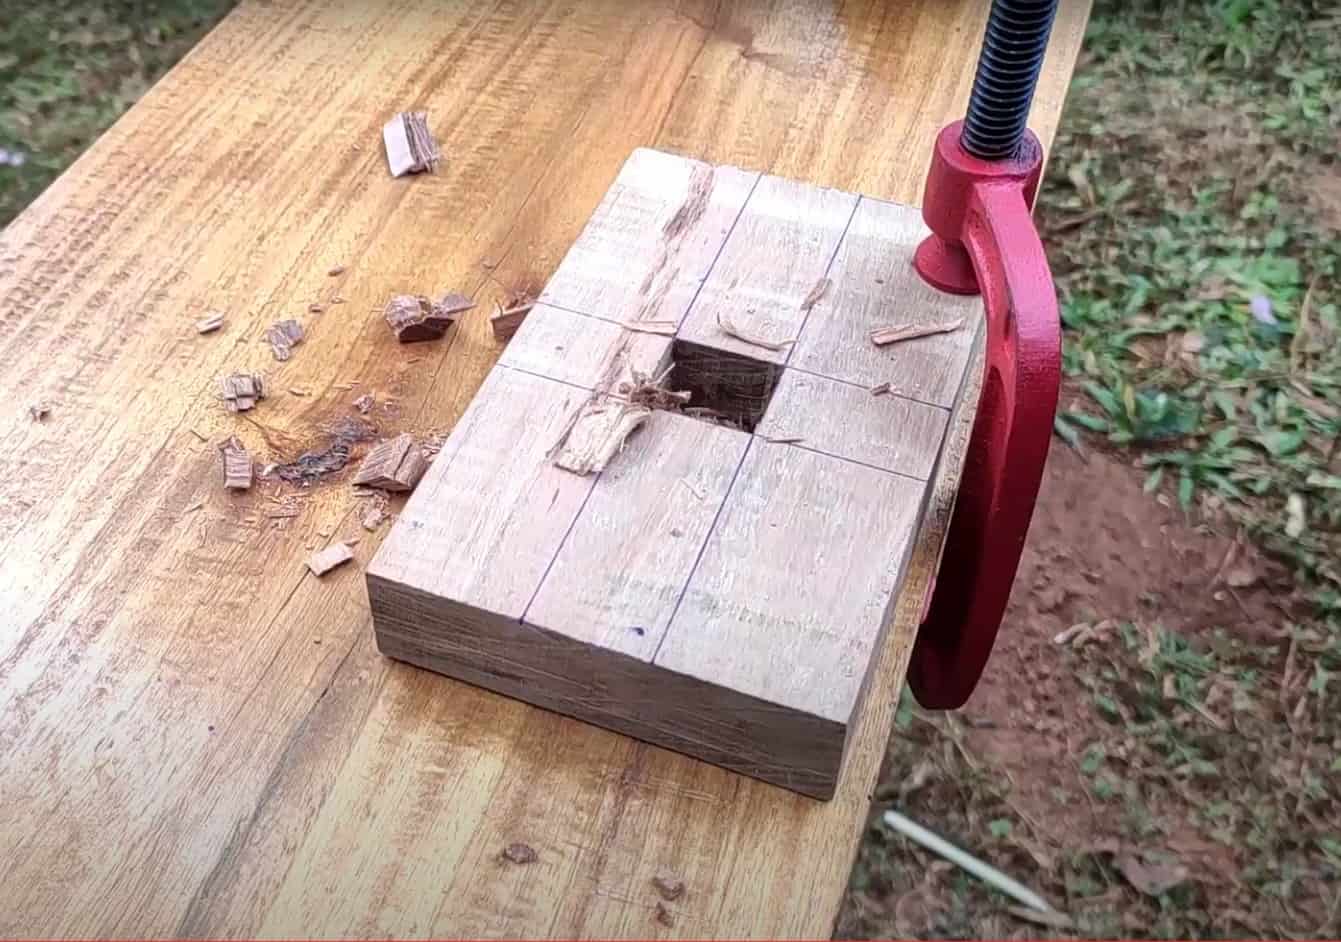 a wooden board with a square hole in the center lies on a wooden table